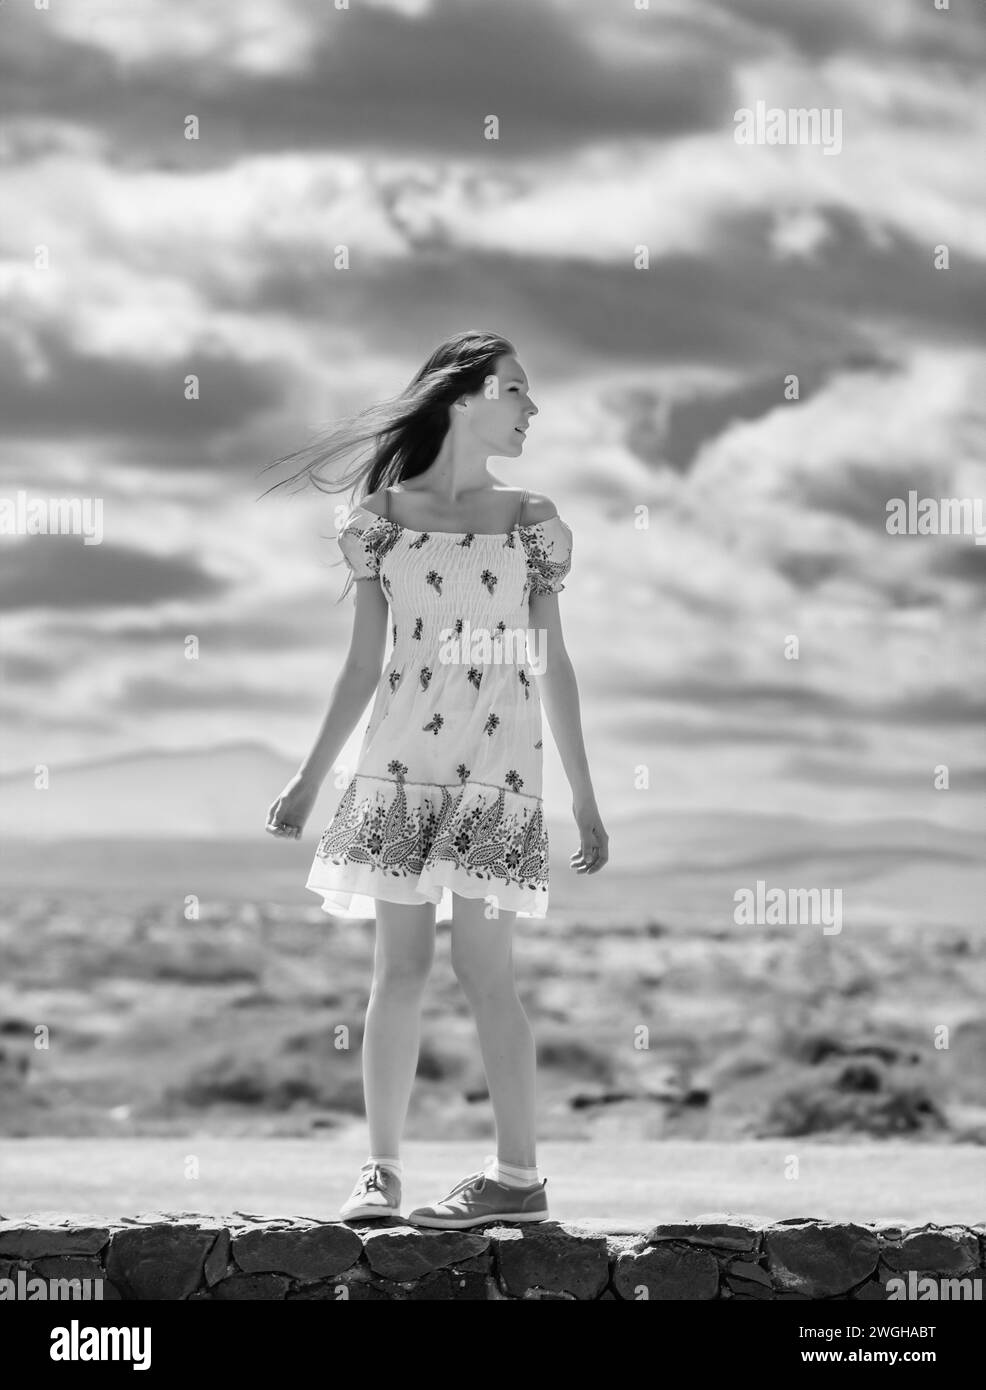 black and white photograph of a teenage girl with a white summer dress against a background of clouds Stock Photo